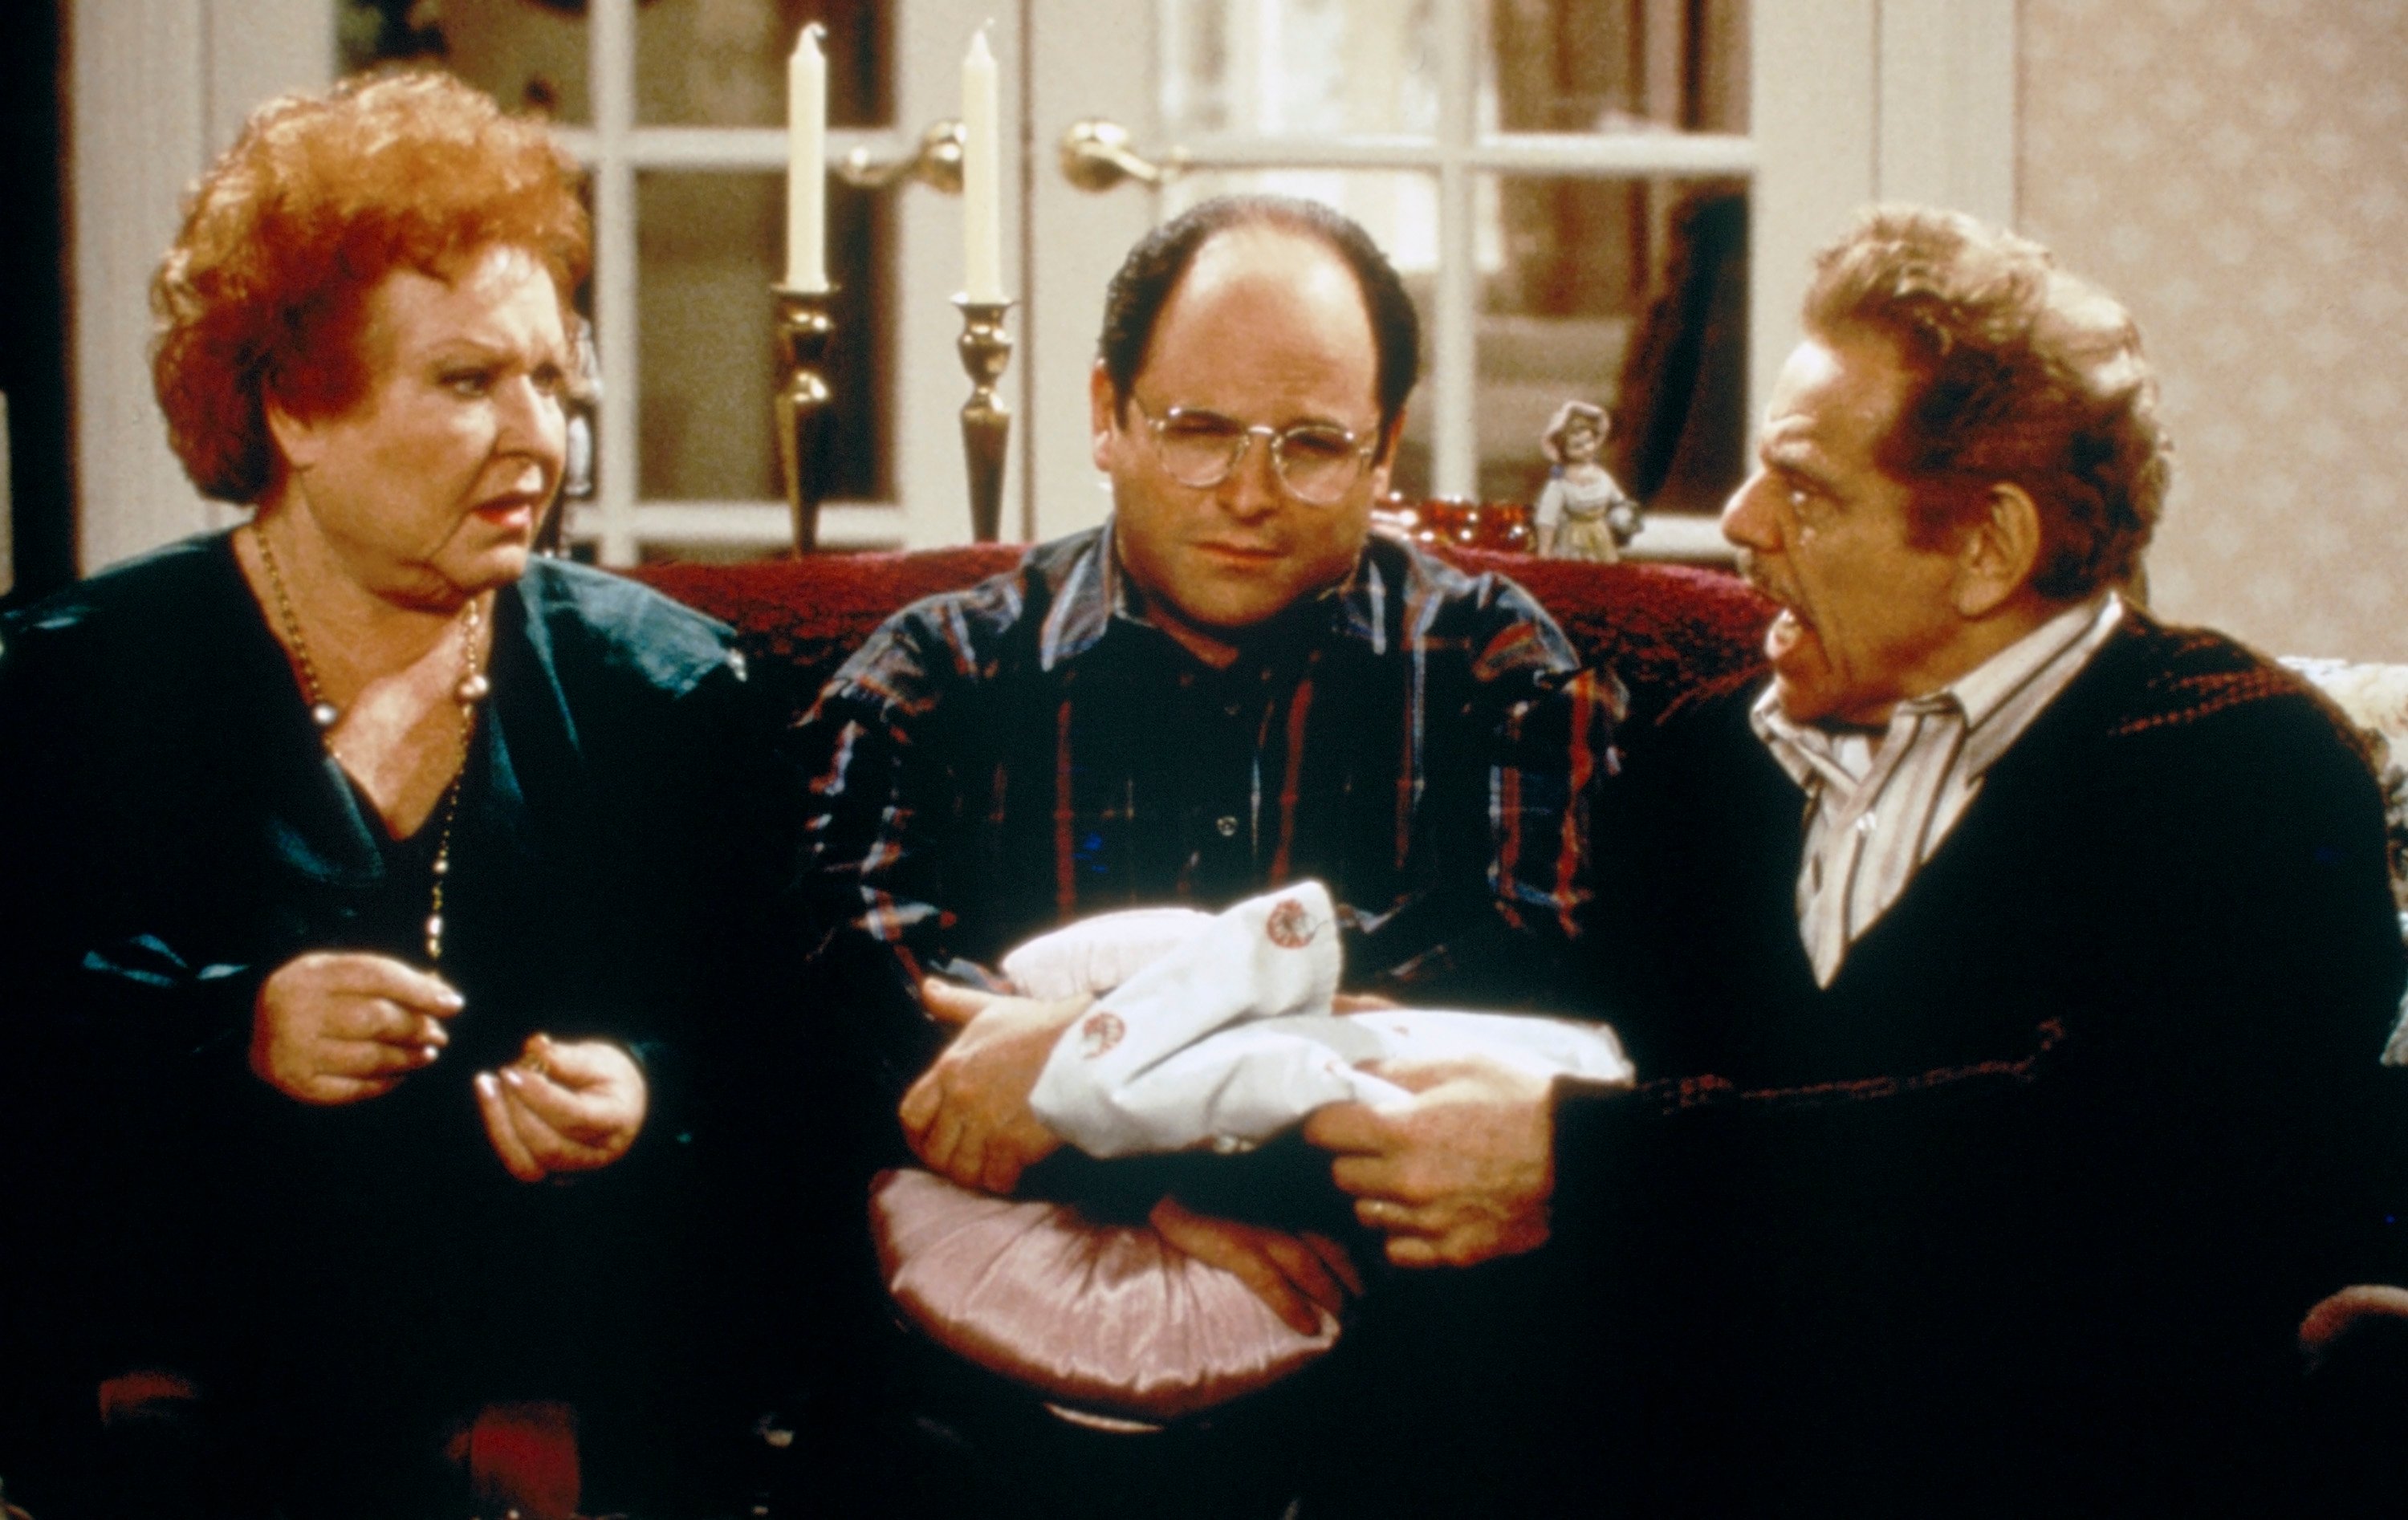 Do You Know the True, Very Dark Origins of Festivus, the Holiday Popularized by ‘Seinfeld’?